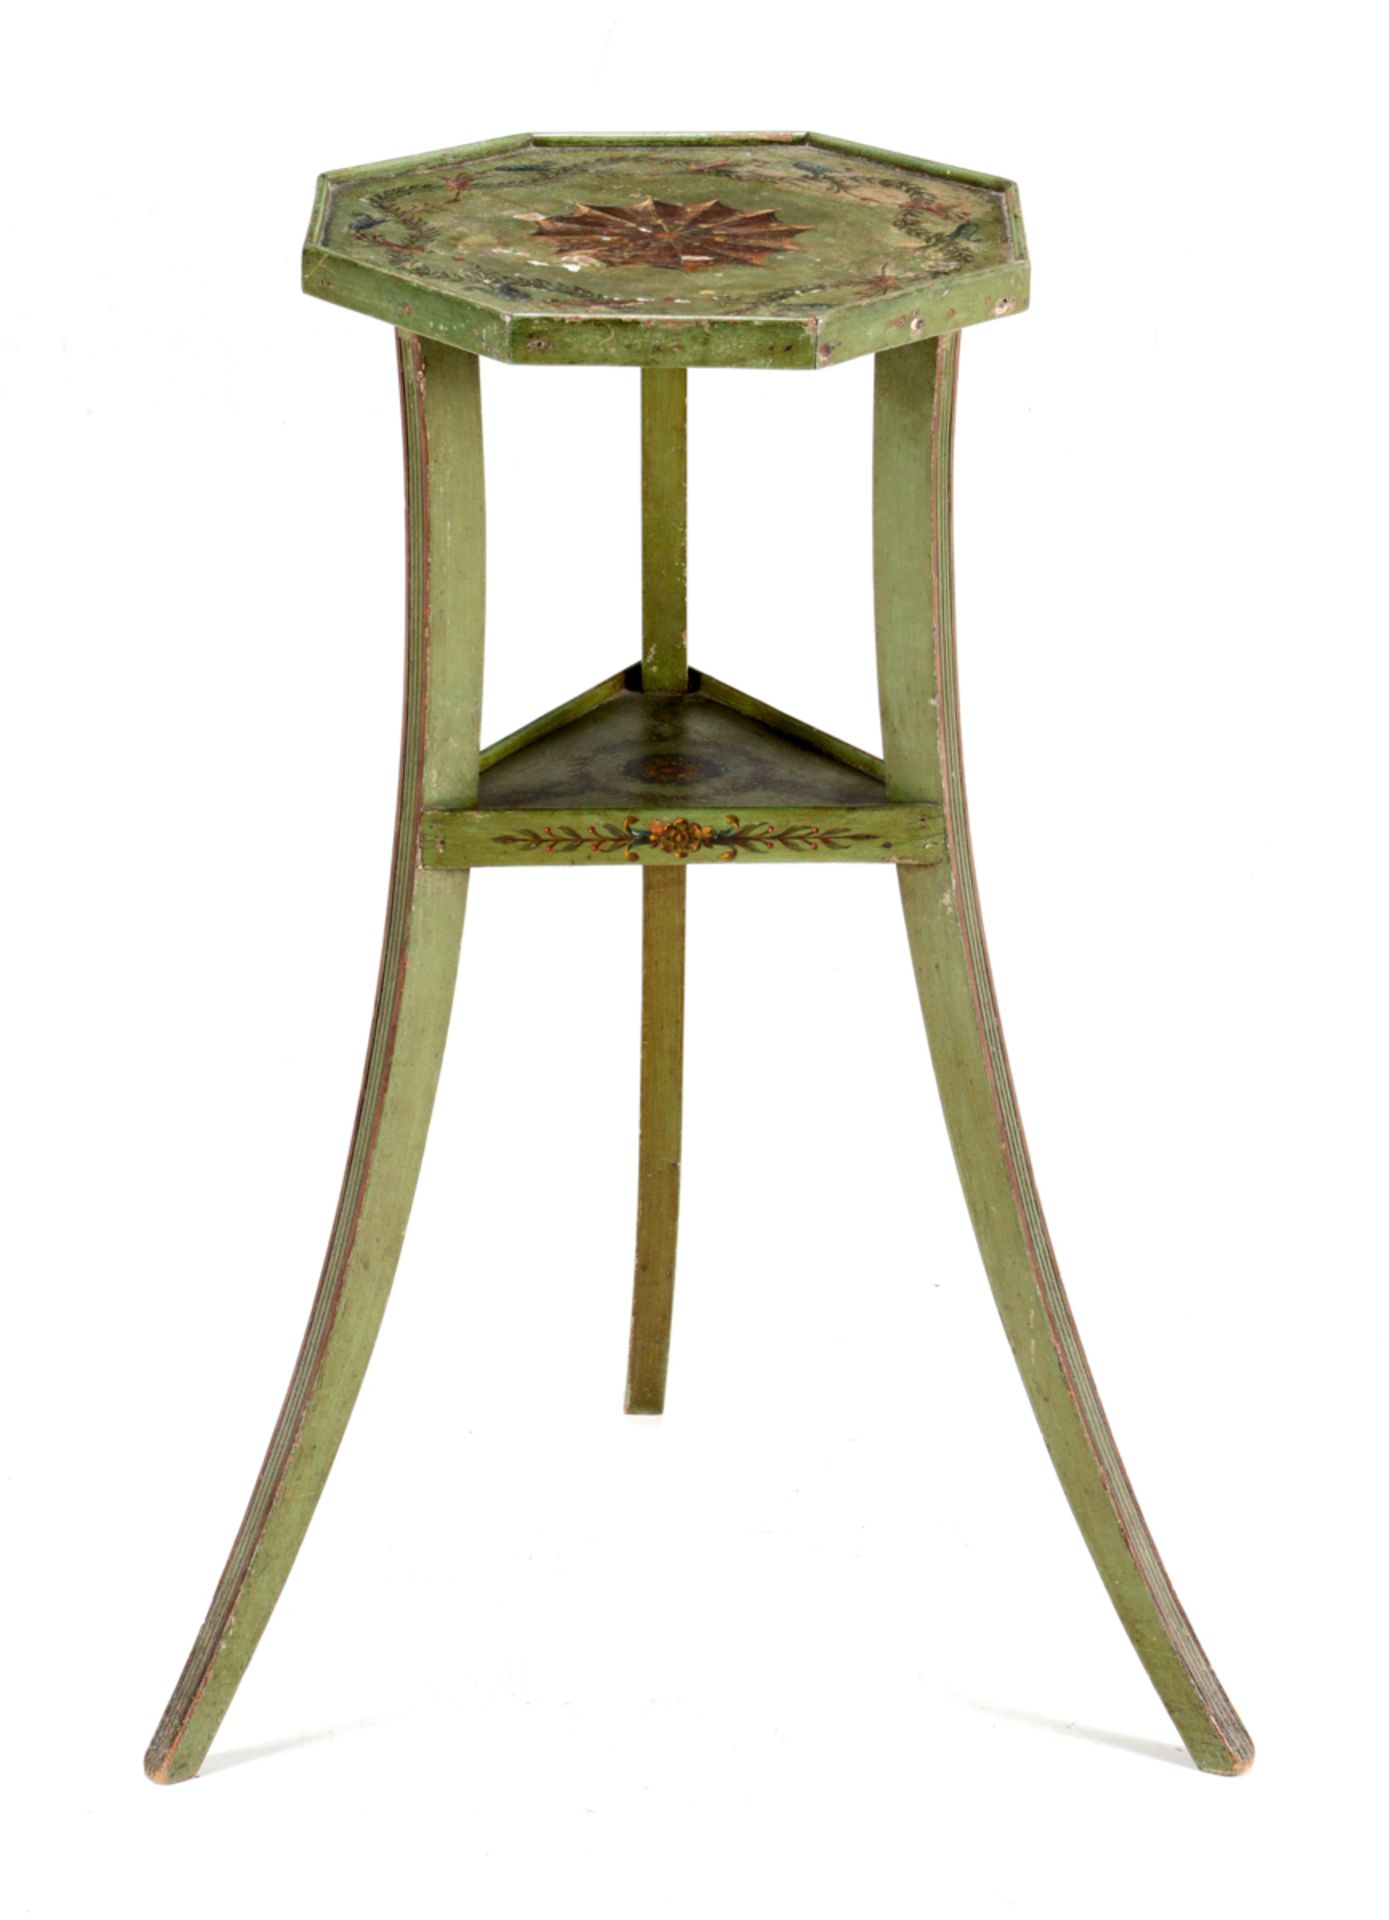 A SMALL GEORGE III SIDE TABLE Painted wood with neoclassical motifs. England, 19th Century. Losses